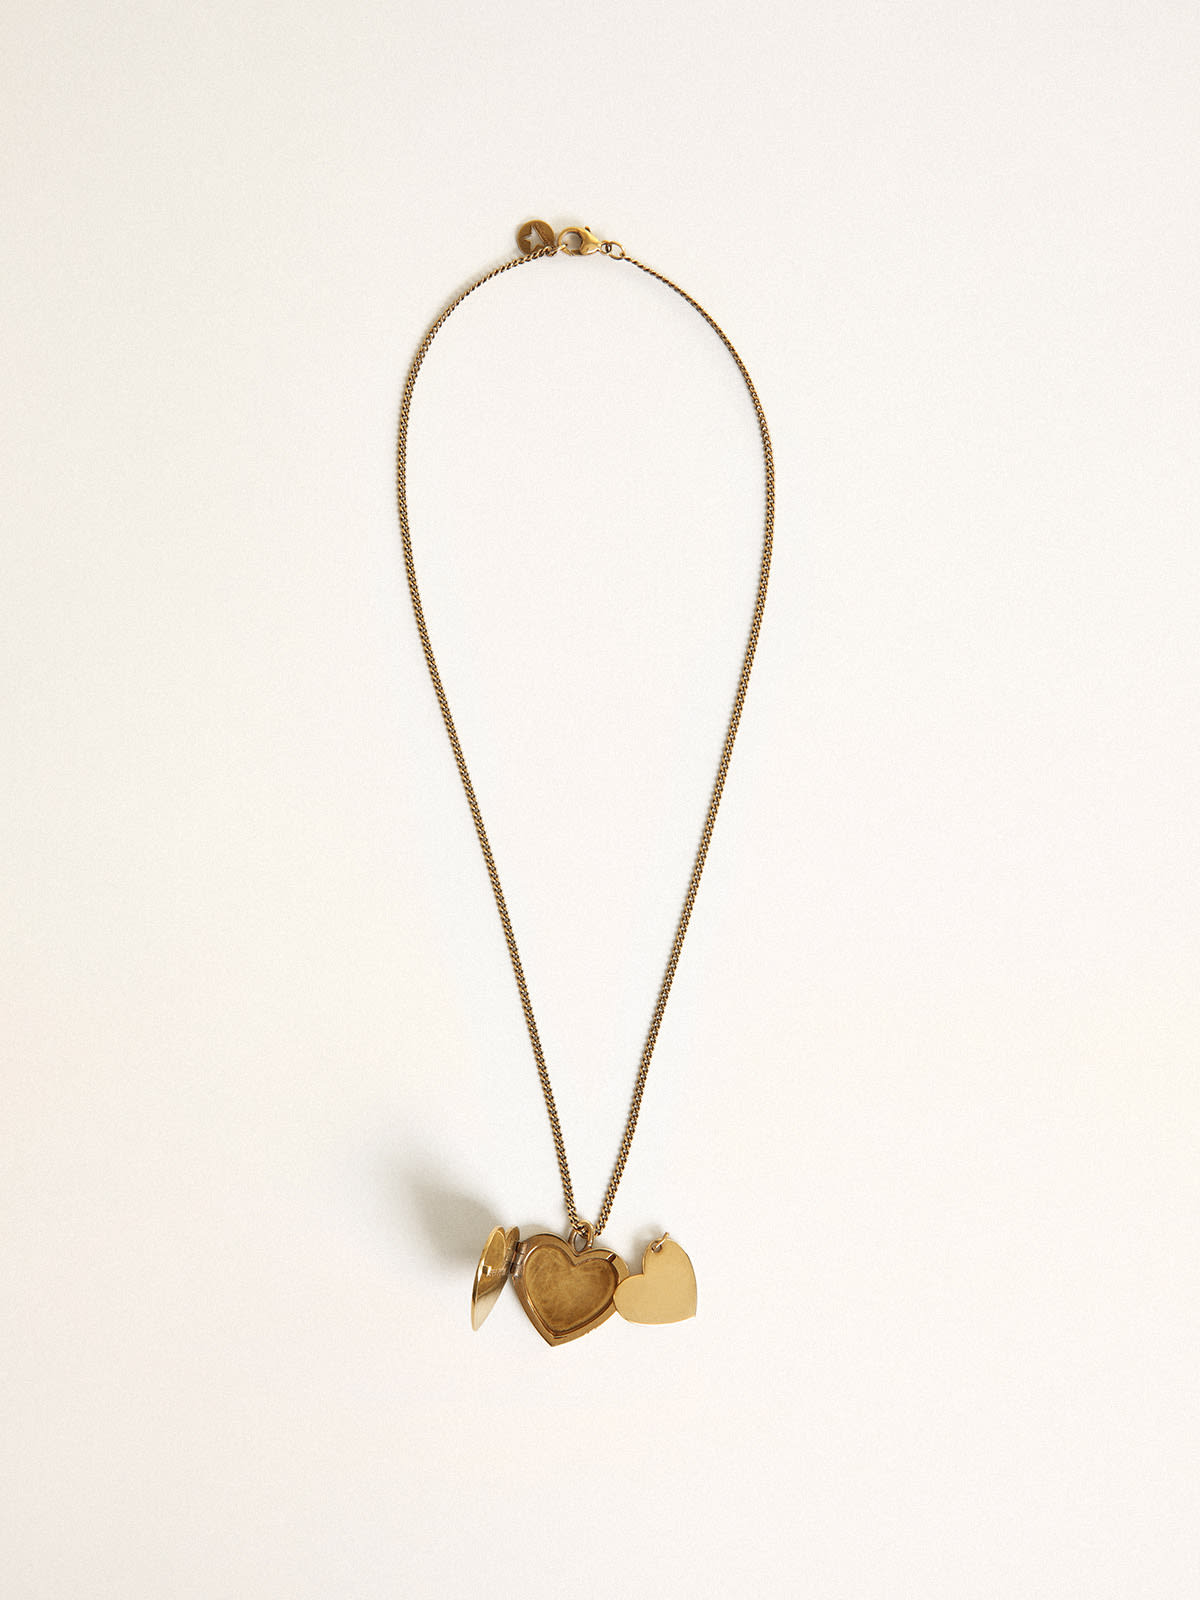 Golden Goose - Necklace in antique gold color with heart charms in 